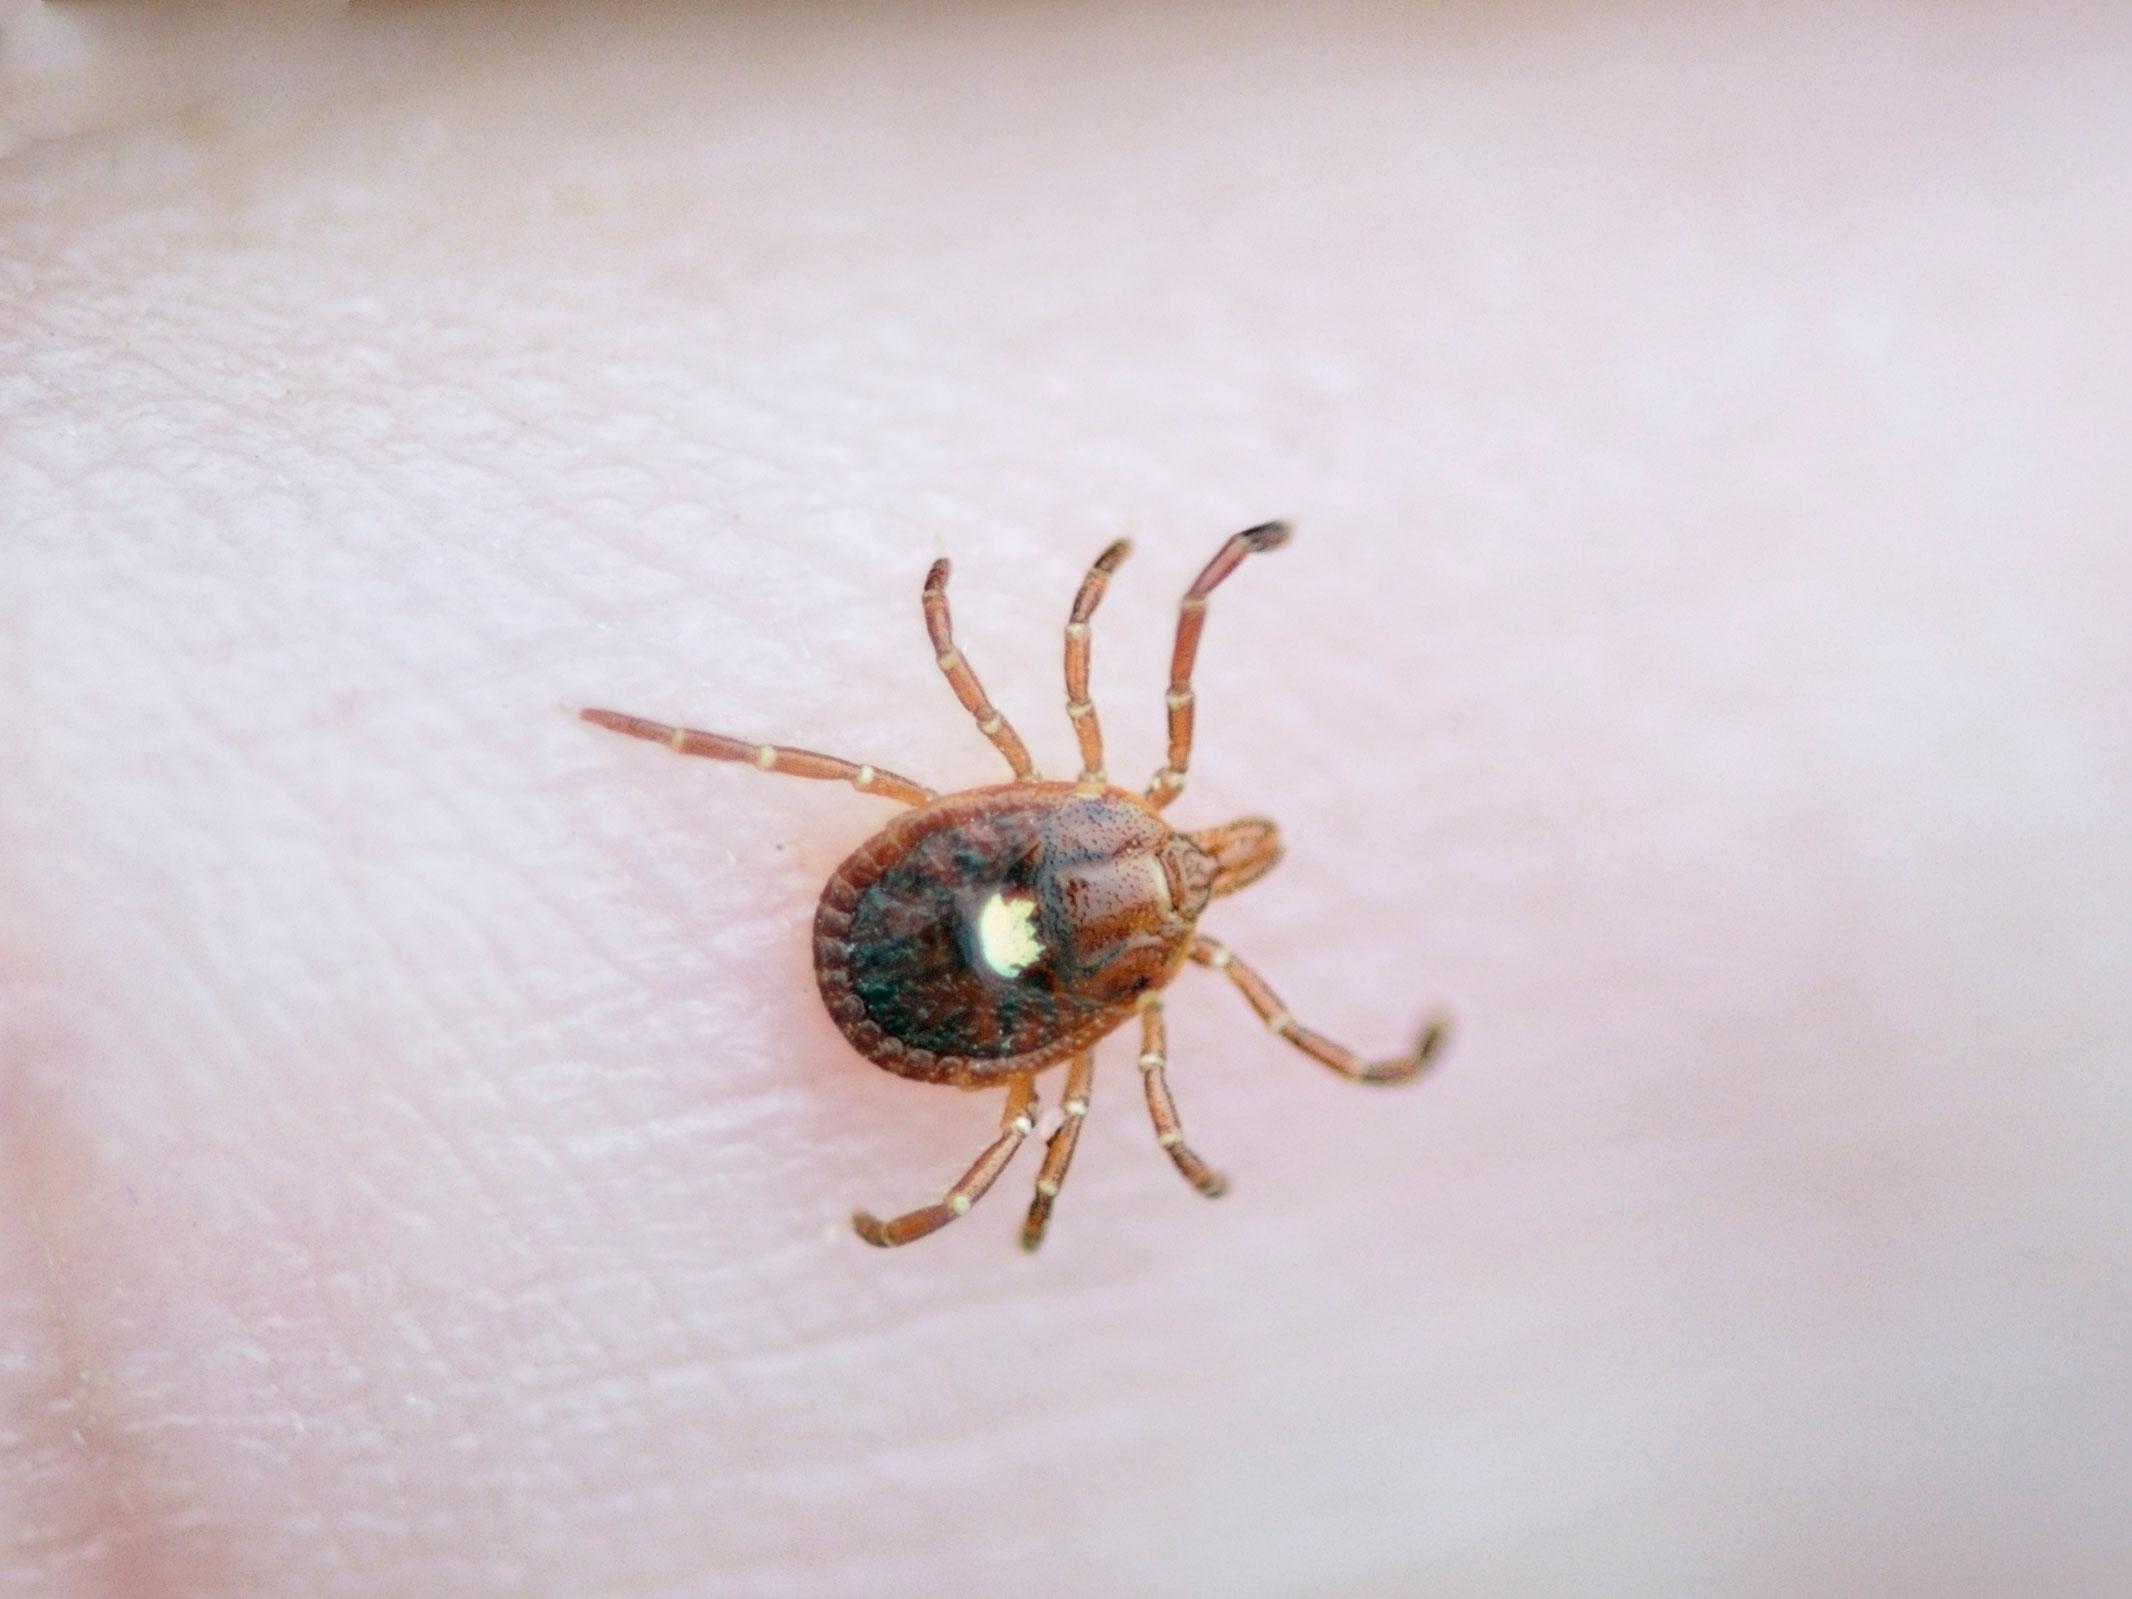 A new tick has been discovered, and its sting makes people allergic to meat